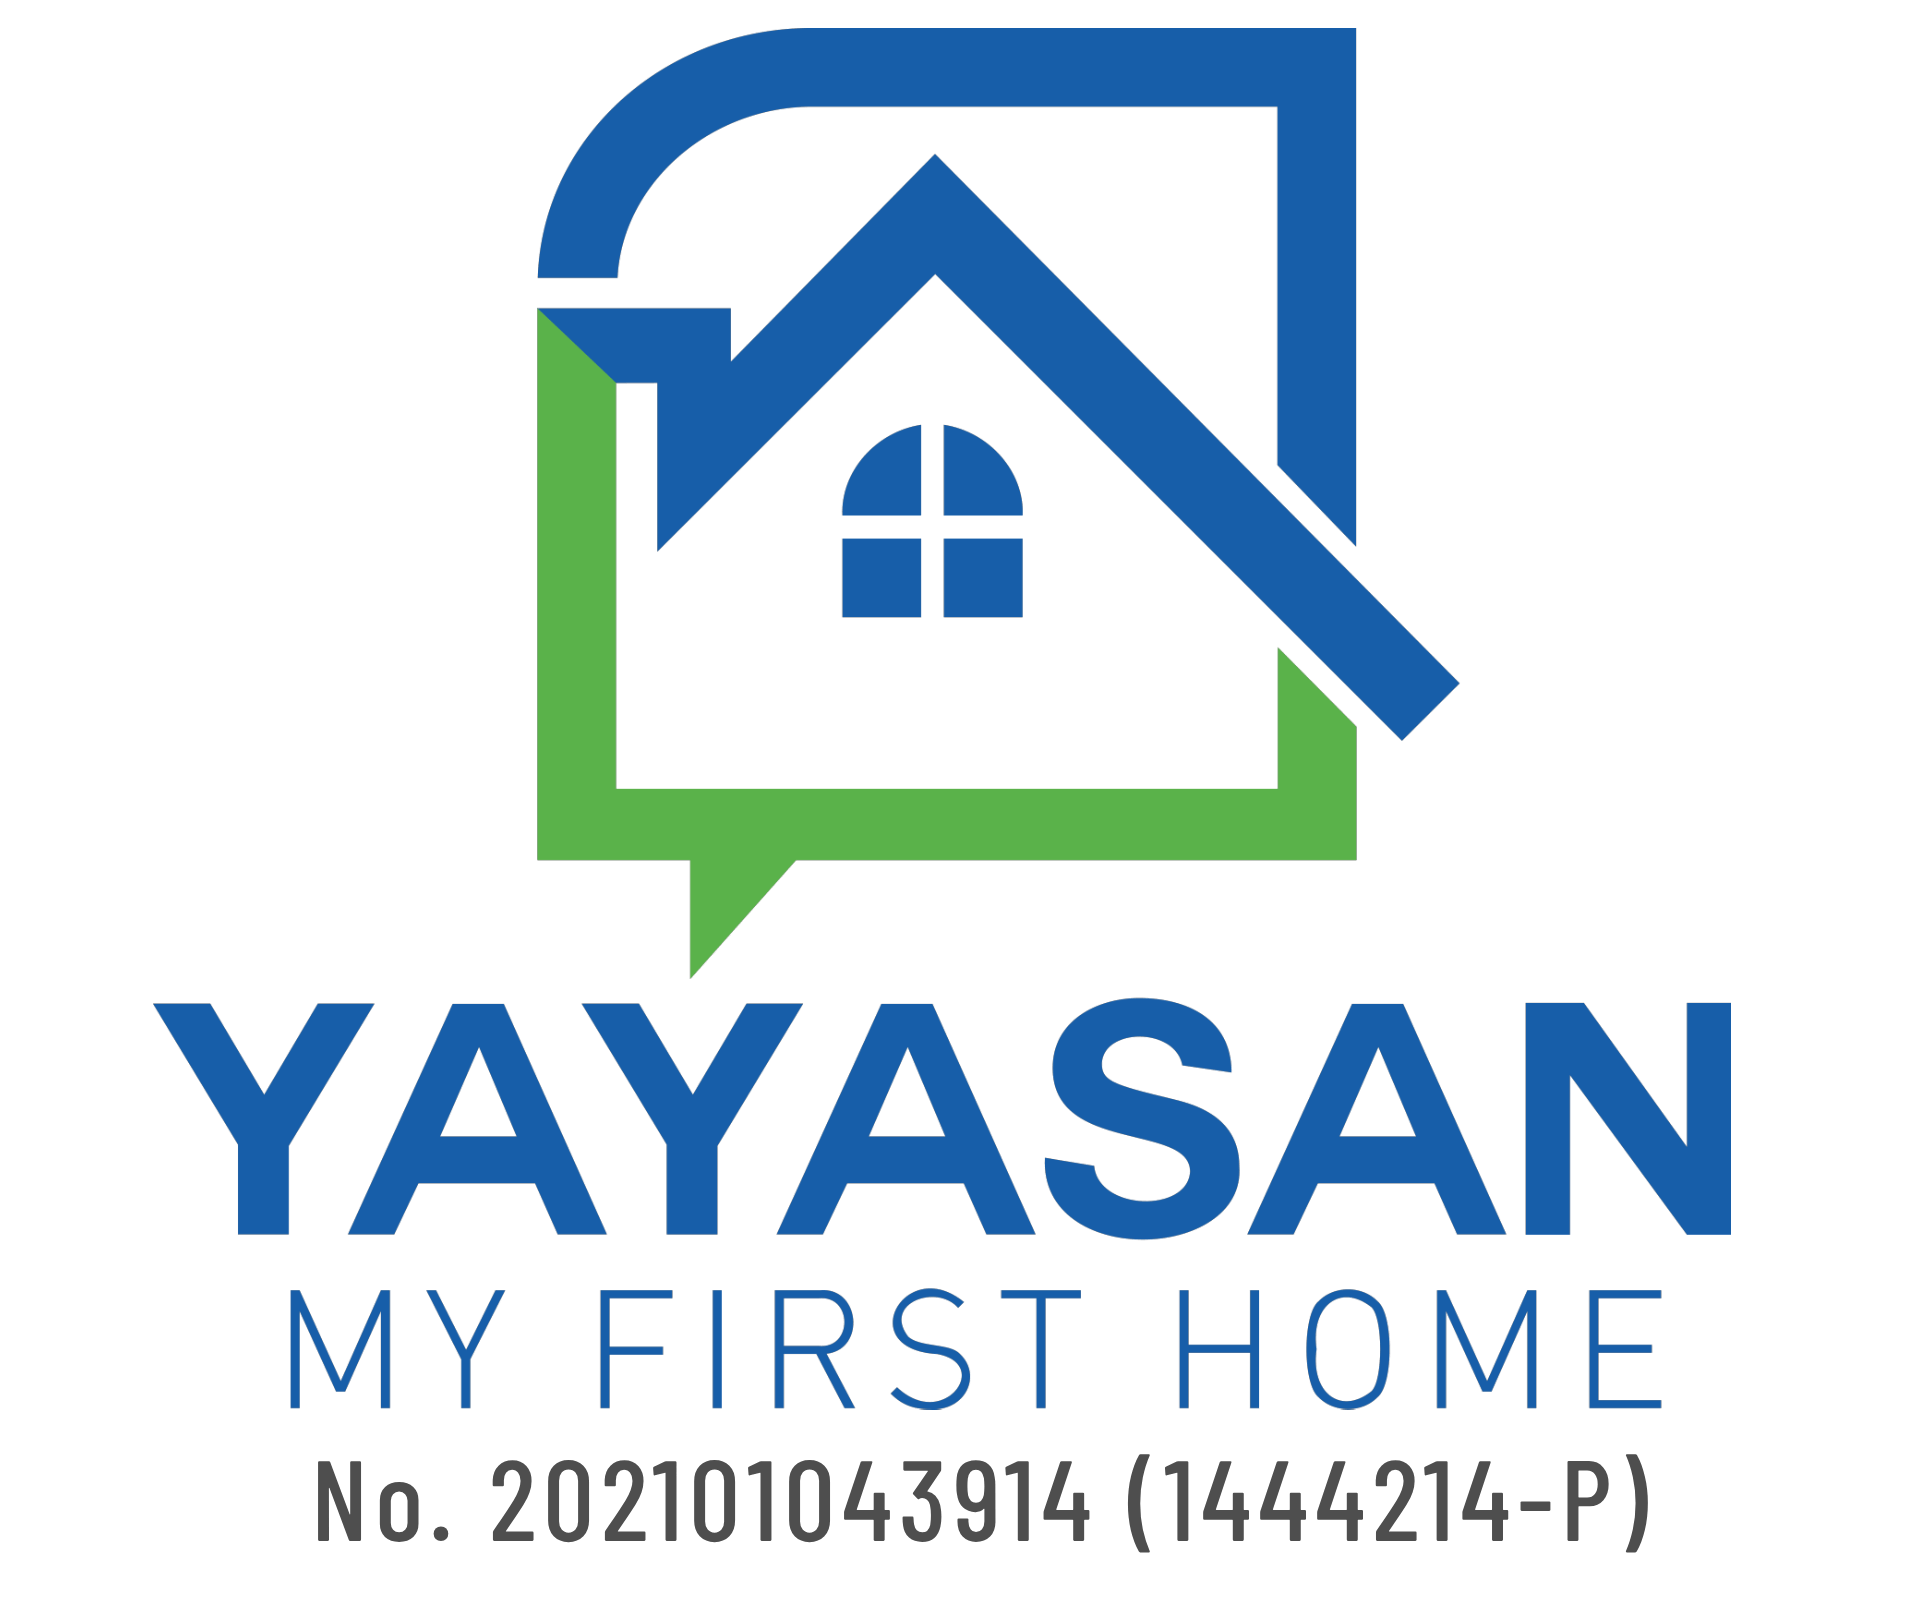 yayasanmyfirsthome.my – Your First Home